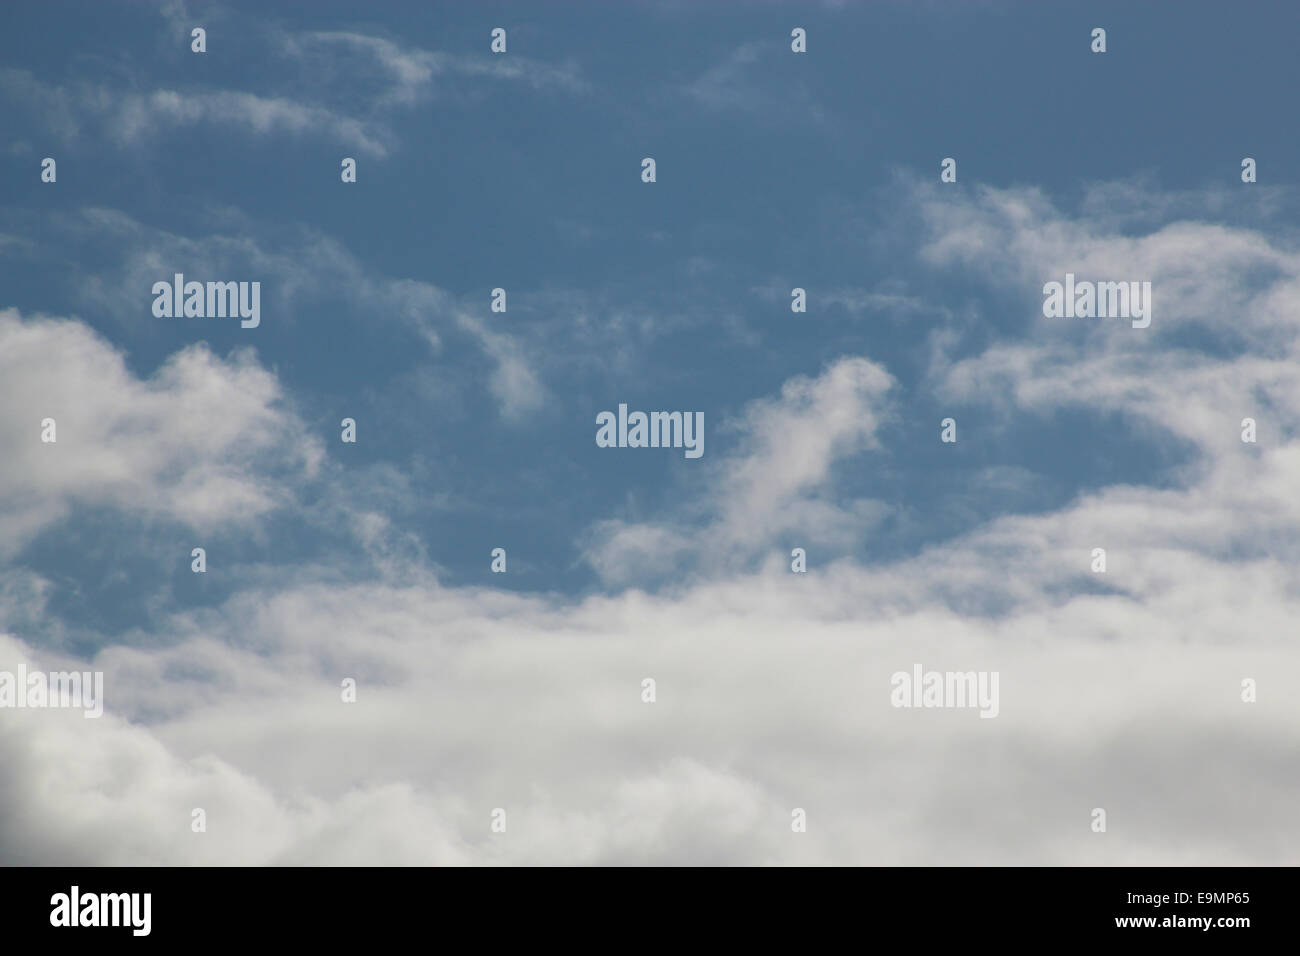 Background clear blue sky with fluffy white clouds Stock Photo